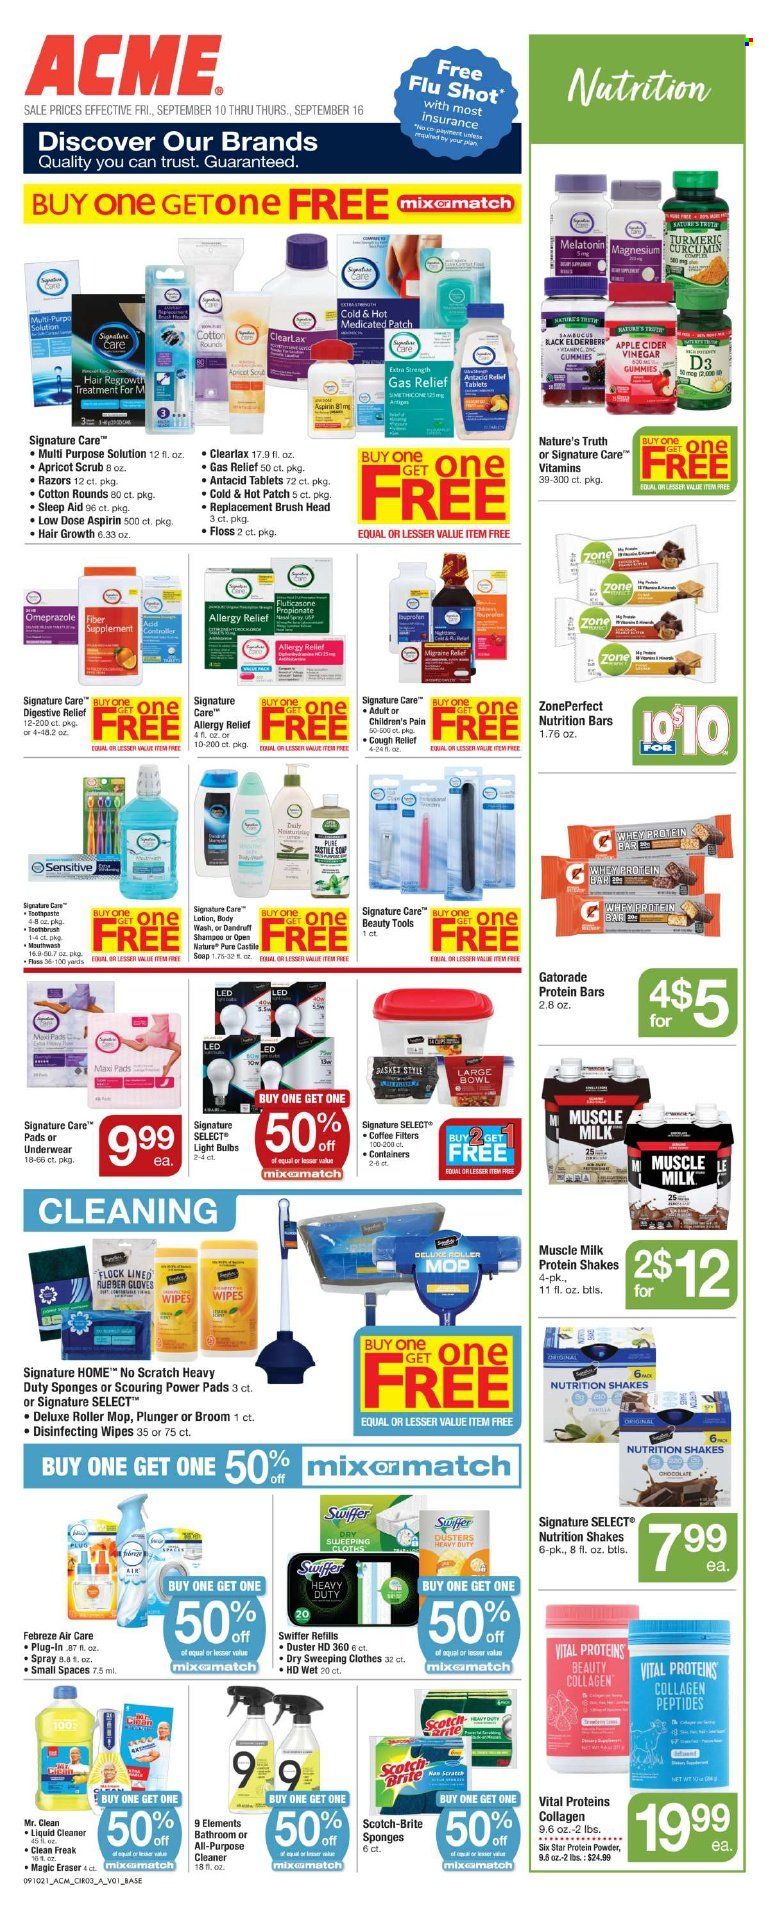 thumbnail - ACME Flyer - 09/10/2021 - 09/16/2021 - Sales products - protein drink, shake, muscle milk, Digestive, nutrition bar, protein bar, apple cider vinegar, vinegar, Gatorade, coffee, wipes, Febreze, cleaner, liquid cleaner, Swiffer, shampoo, mouthwash, brush head, sanitary pads, body lotion, brush, basket, gloves, sponge, mop, duster, broom, bowl, eraser, bulb, light bulb, underwear, magnesium, Nature's Truth, whey protein, Vital Proteins, Antacid, vitamin D3, Low Dose, aspirin, allergy relief. Page 4.